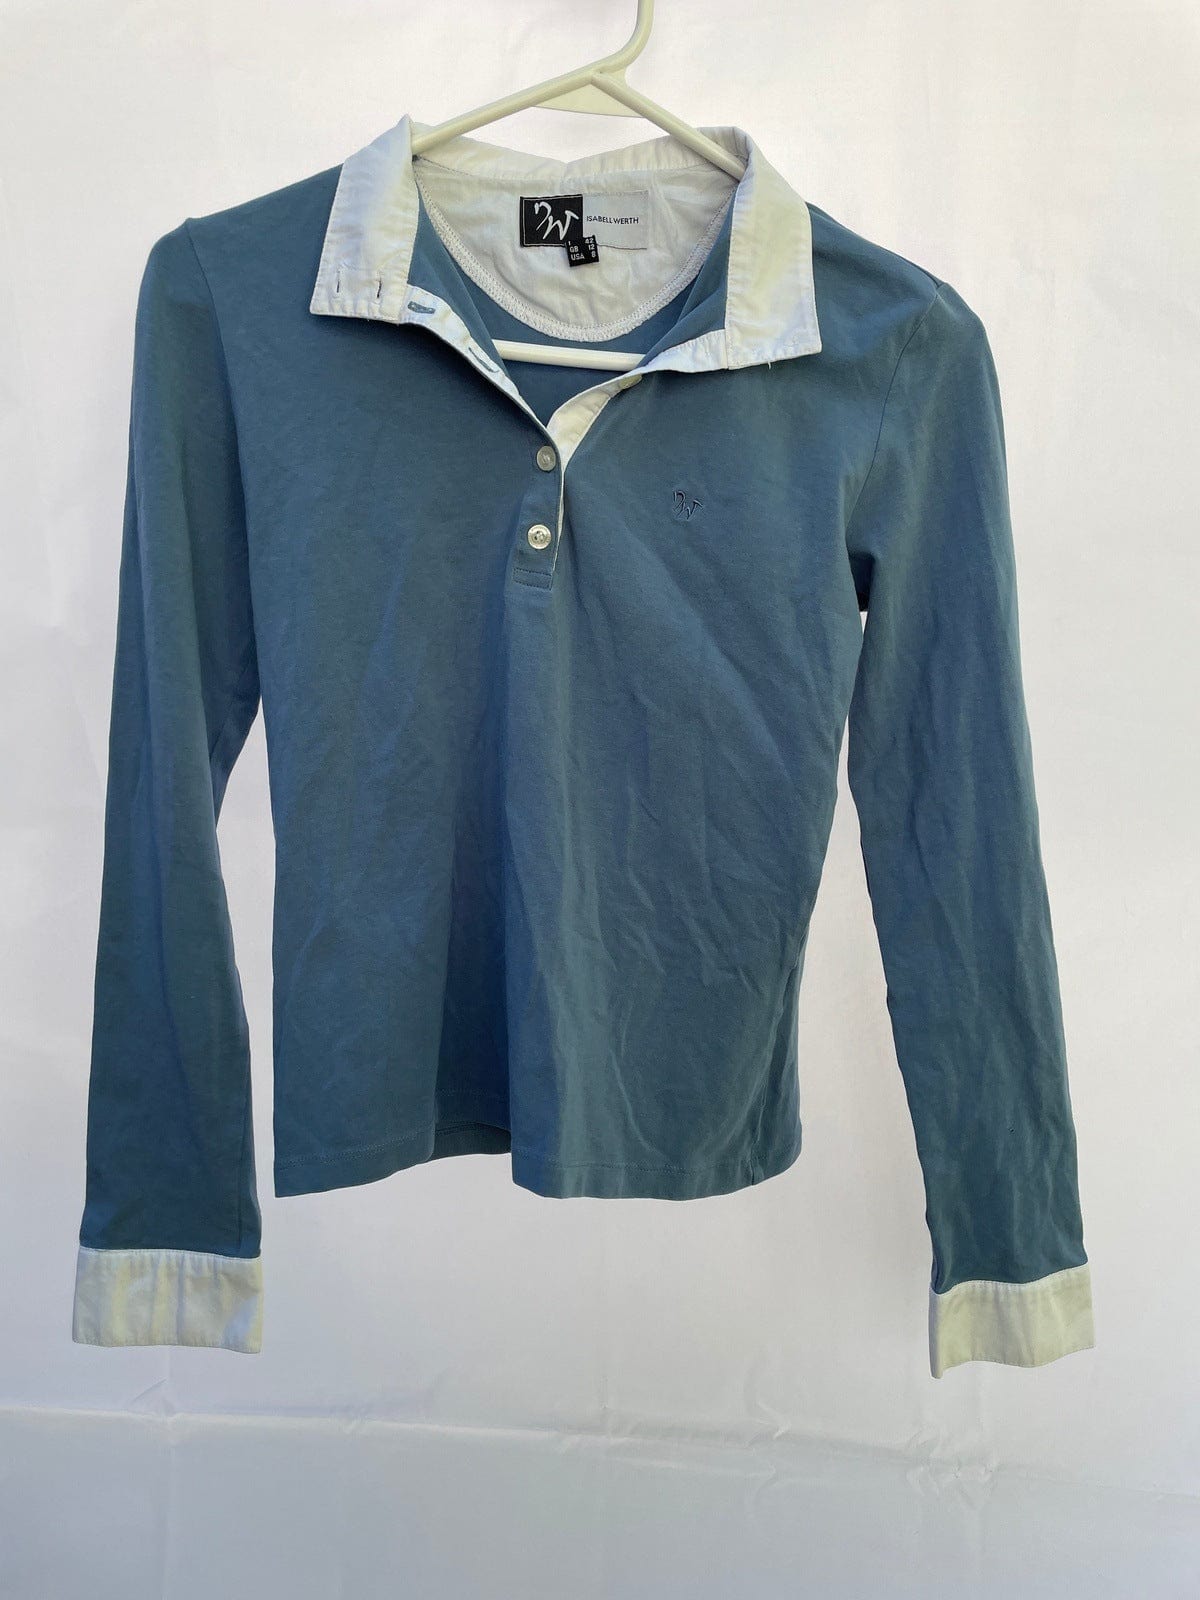 ThriftedEquestrian Clothing XS Isabell Werth Long Sleeve Show Shirt - XS